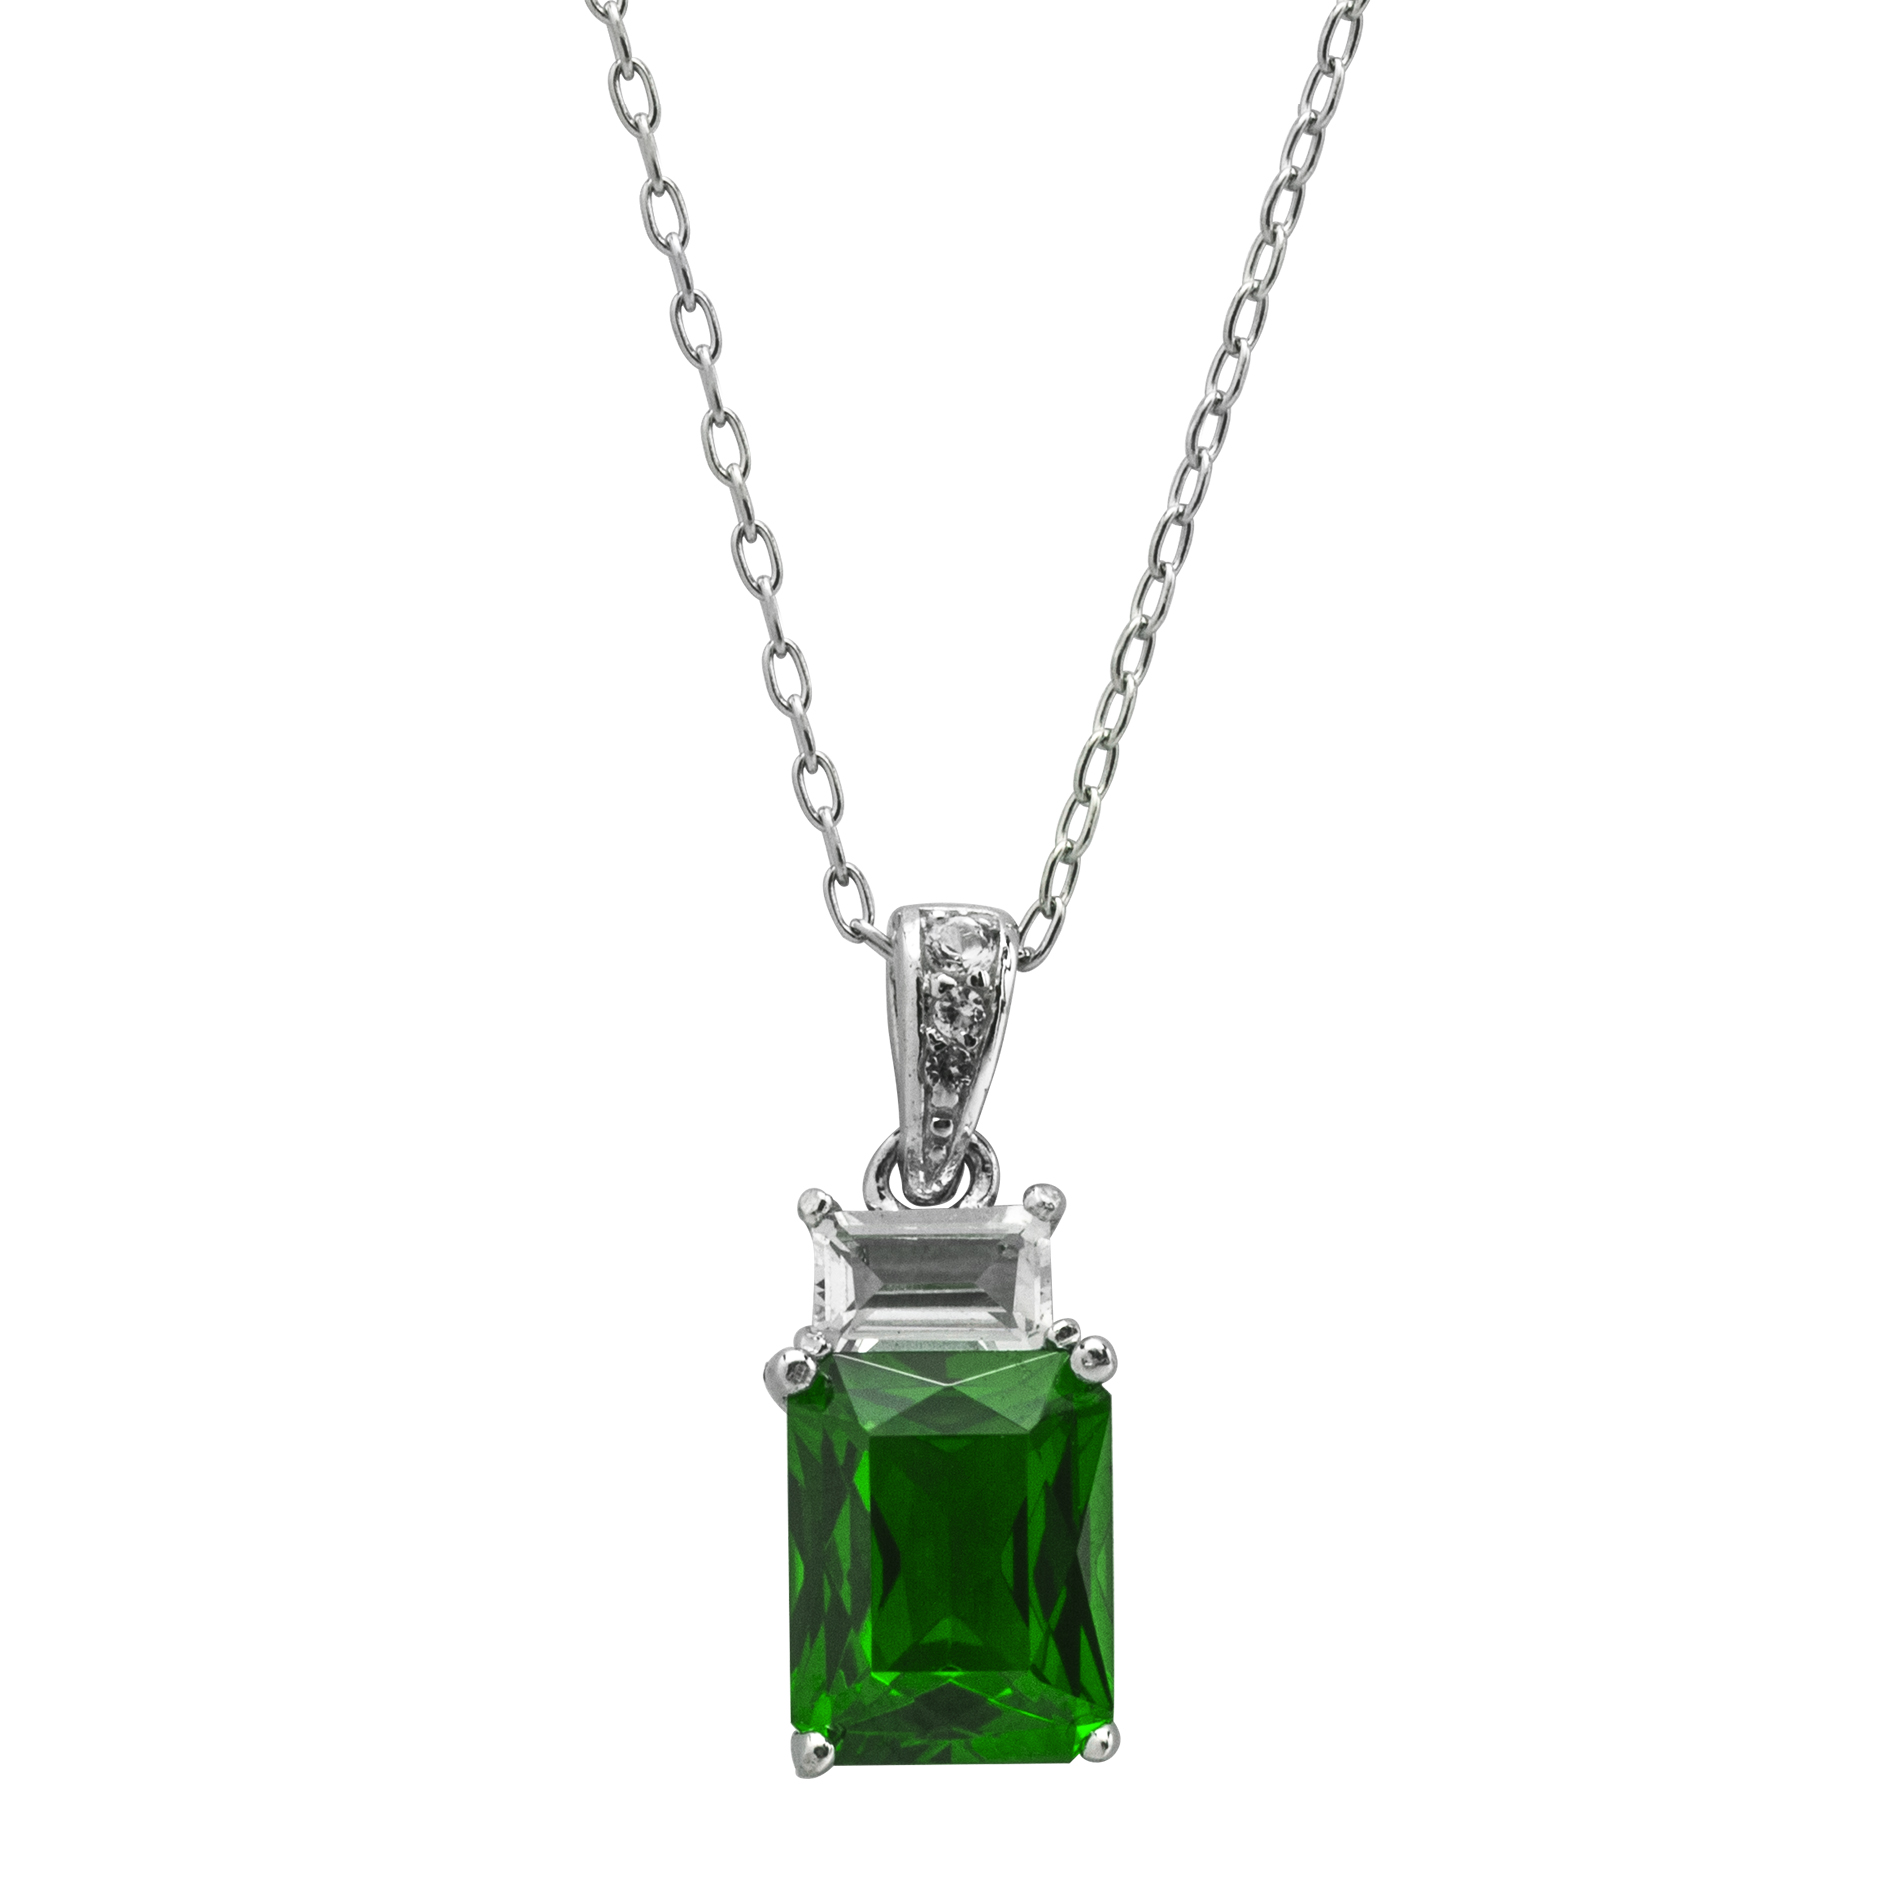 Simulated Emerald Pendant Sterling Silver